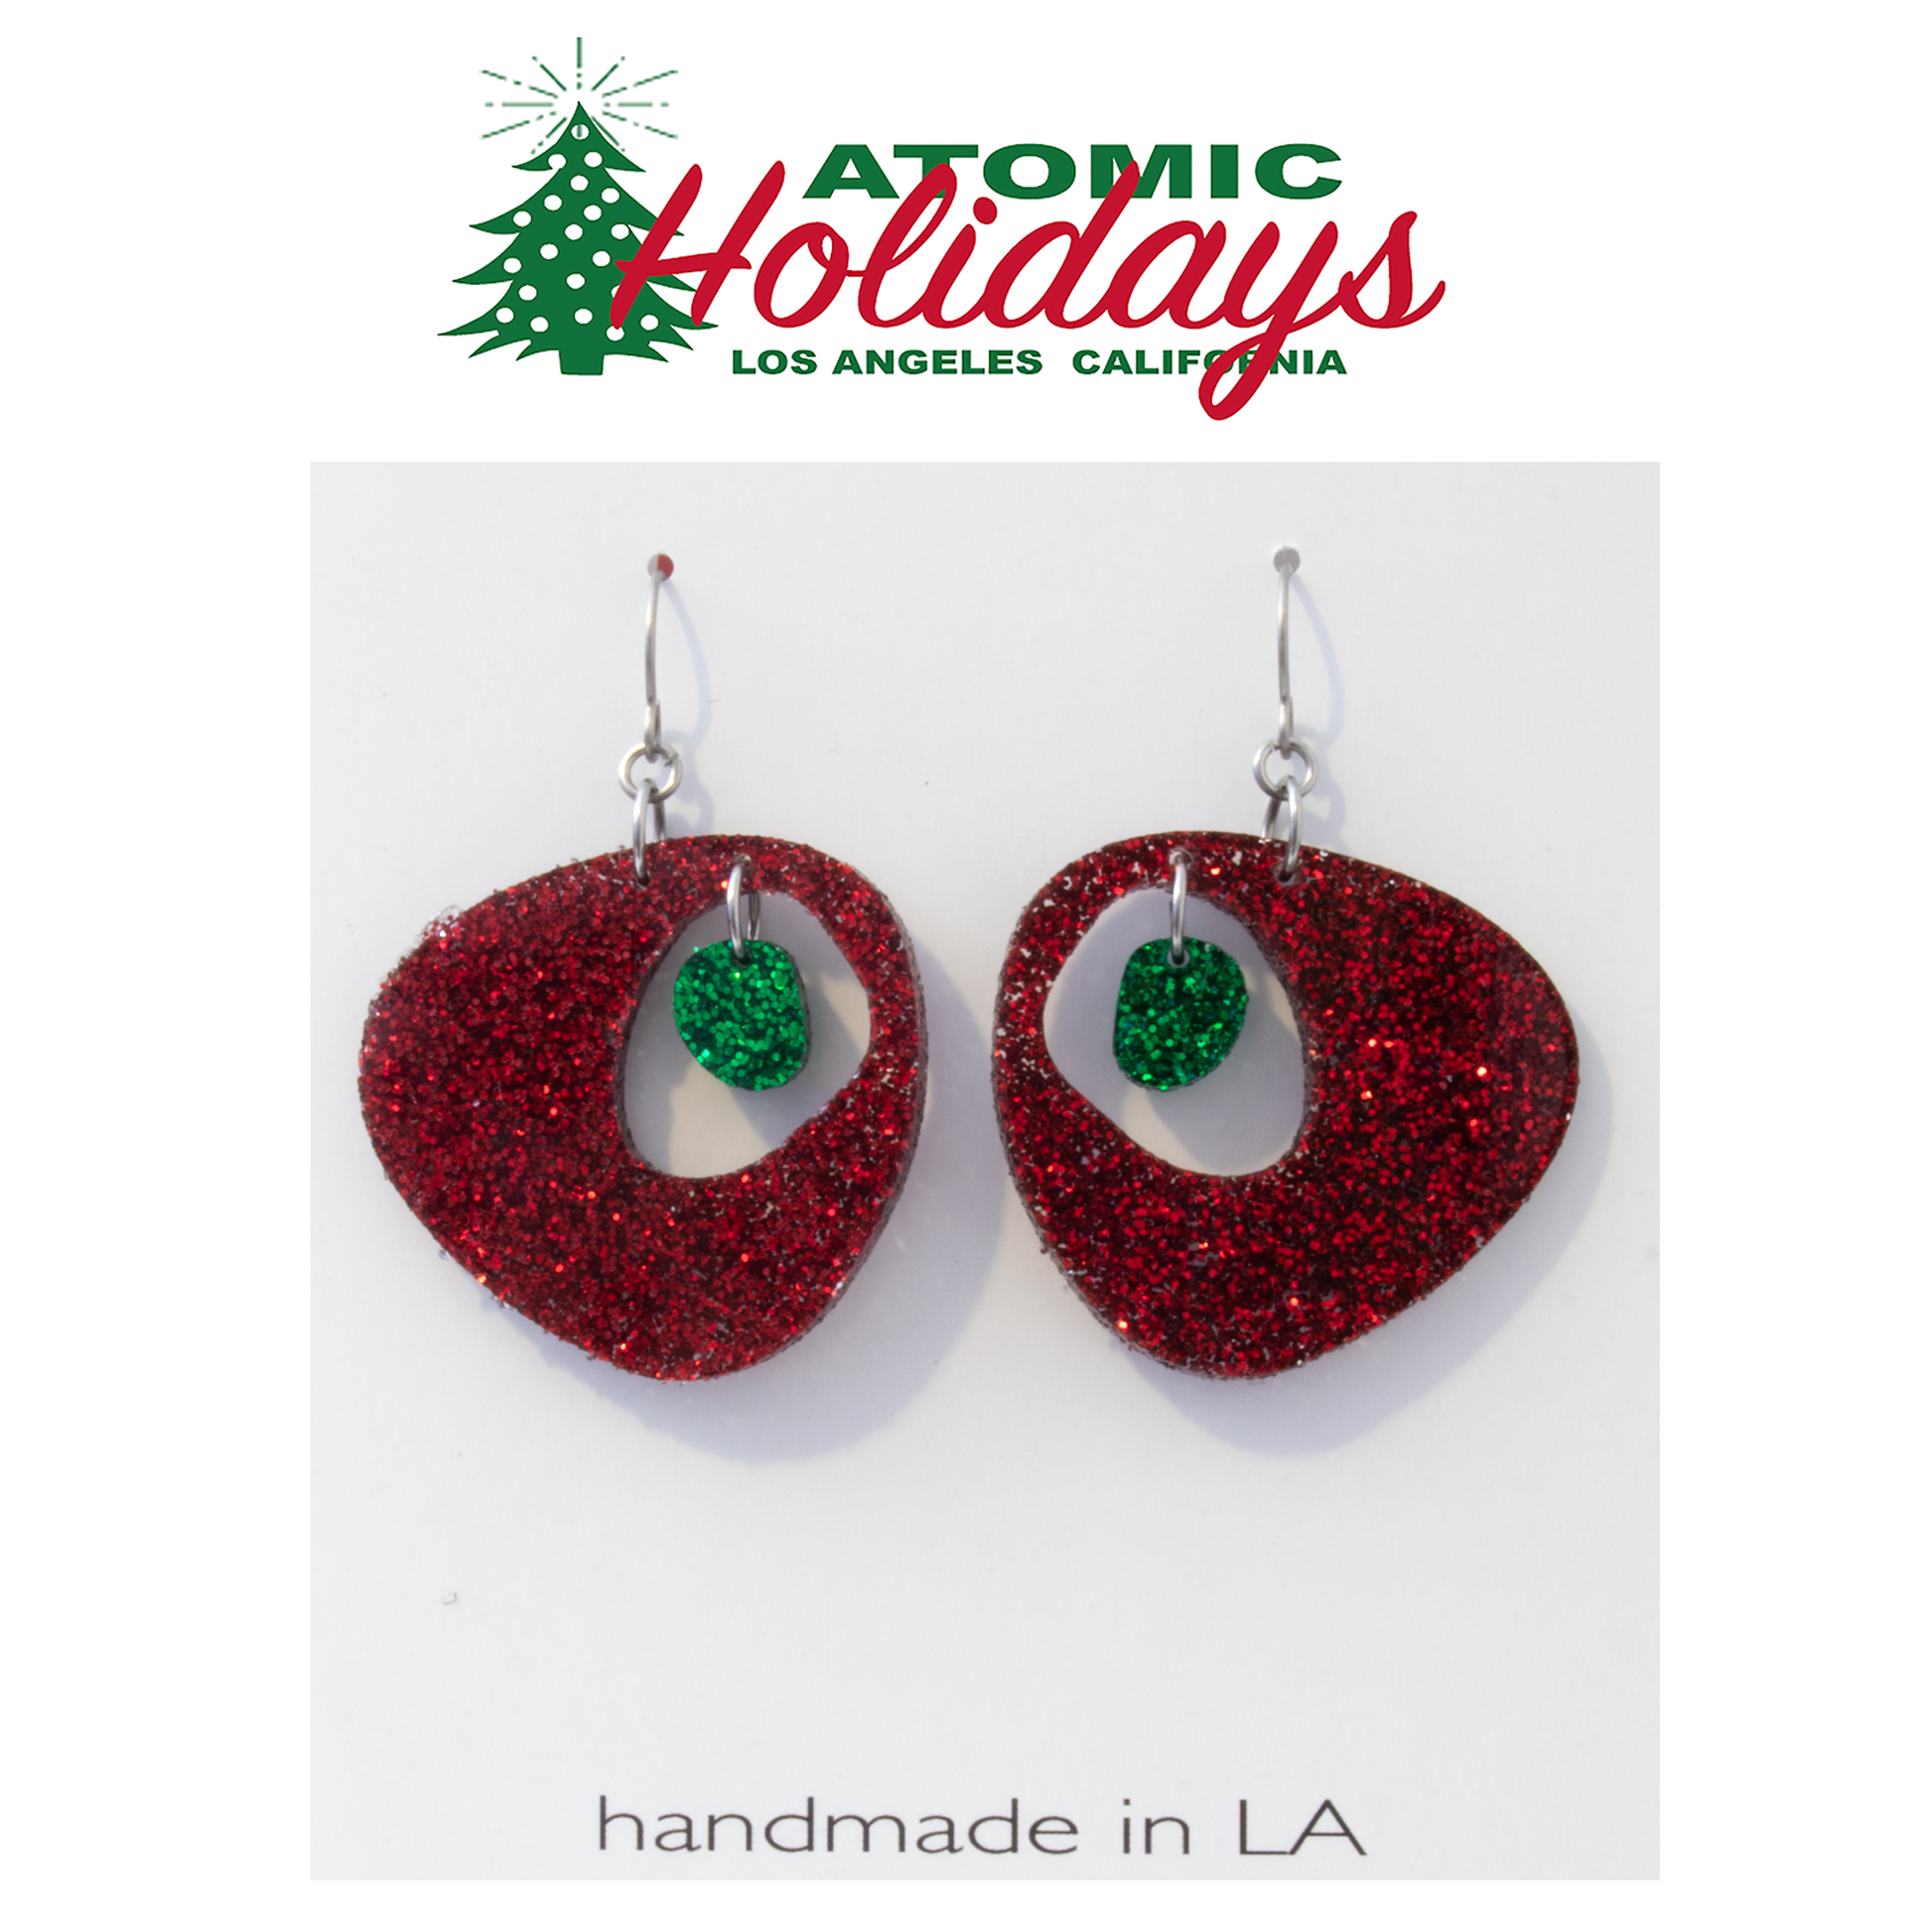 Atomic Holidays Glitter Red and Green Festive Christmas Earrings in mid century modern style by AtomicMobiles.com